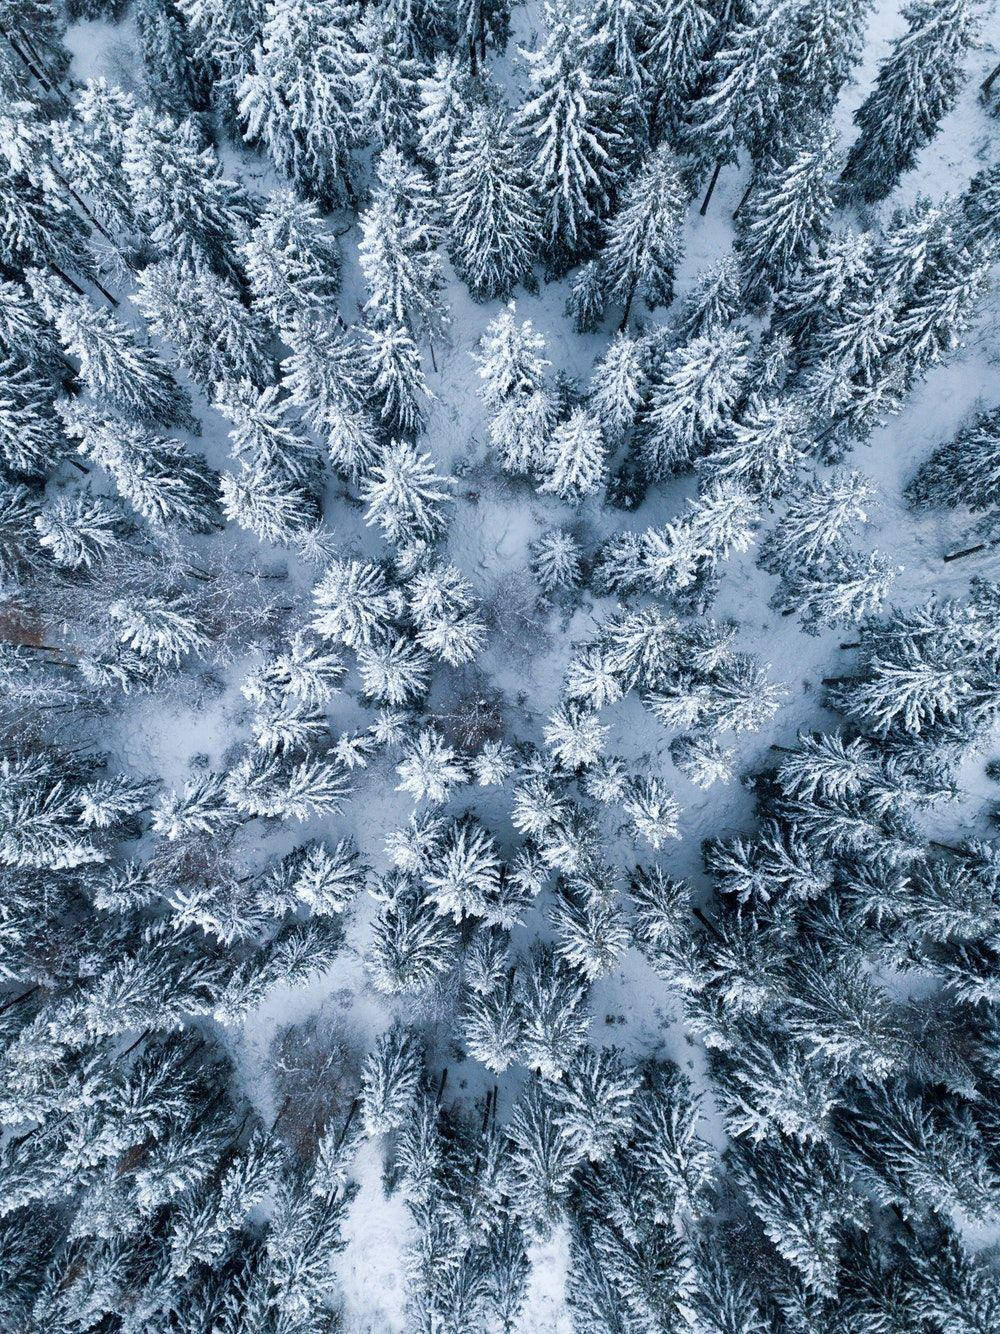 Ipad Pro Top View Of Snowy Forest Wallpaper